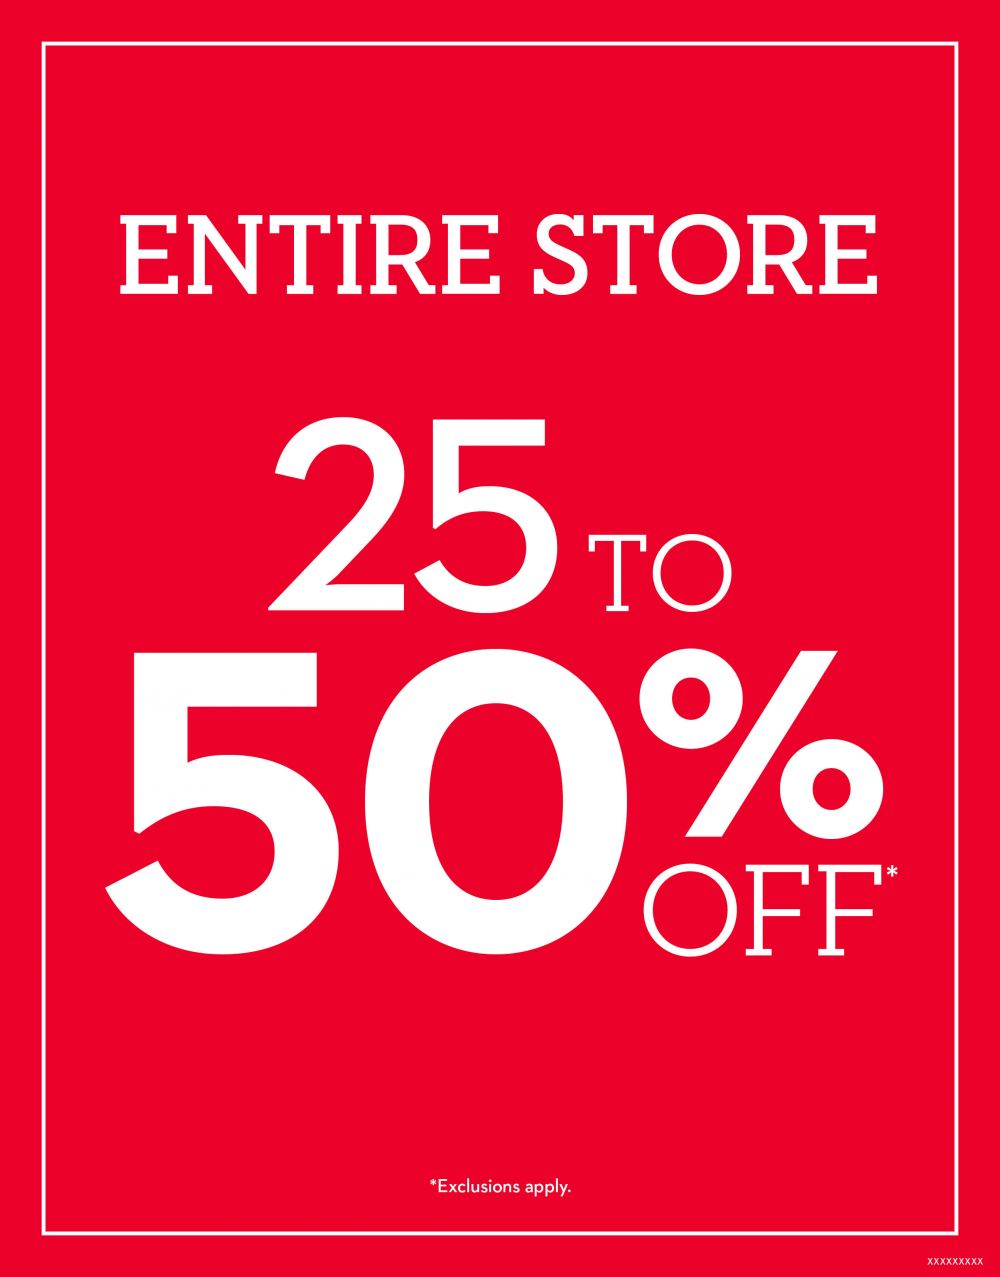 25-50% off Entire Store*